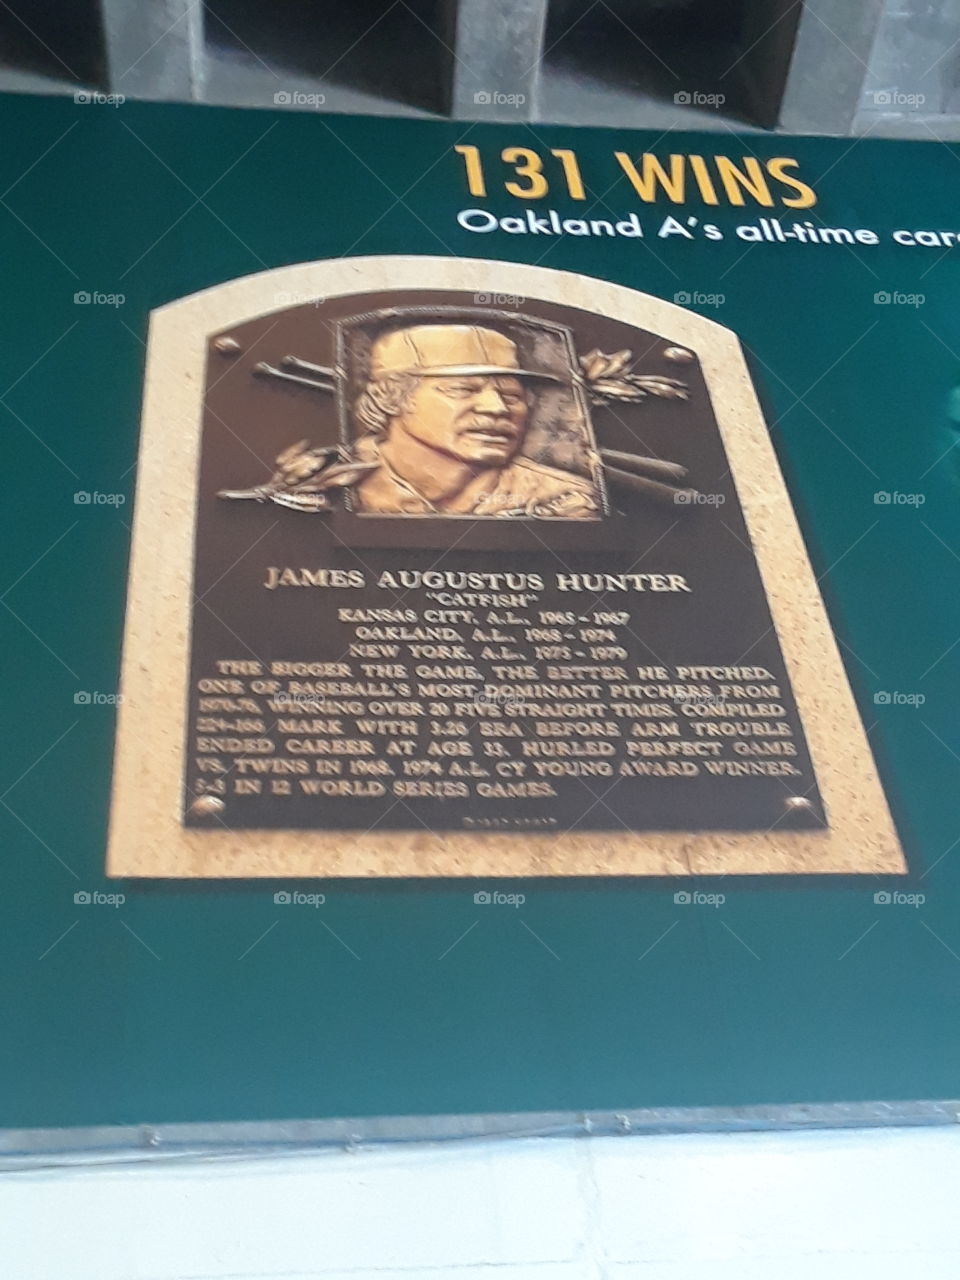 catfish hunter. one of the best Oakland A's all time.He throw the ball with passion and dedication for the Oakland A's ball club.Terrific memory at the ball park.i had to take a picture of this.131 wins for the yellow and green team.